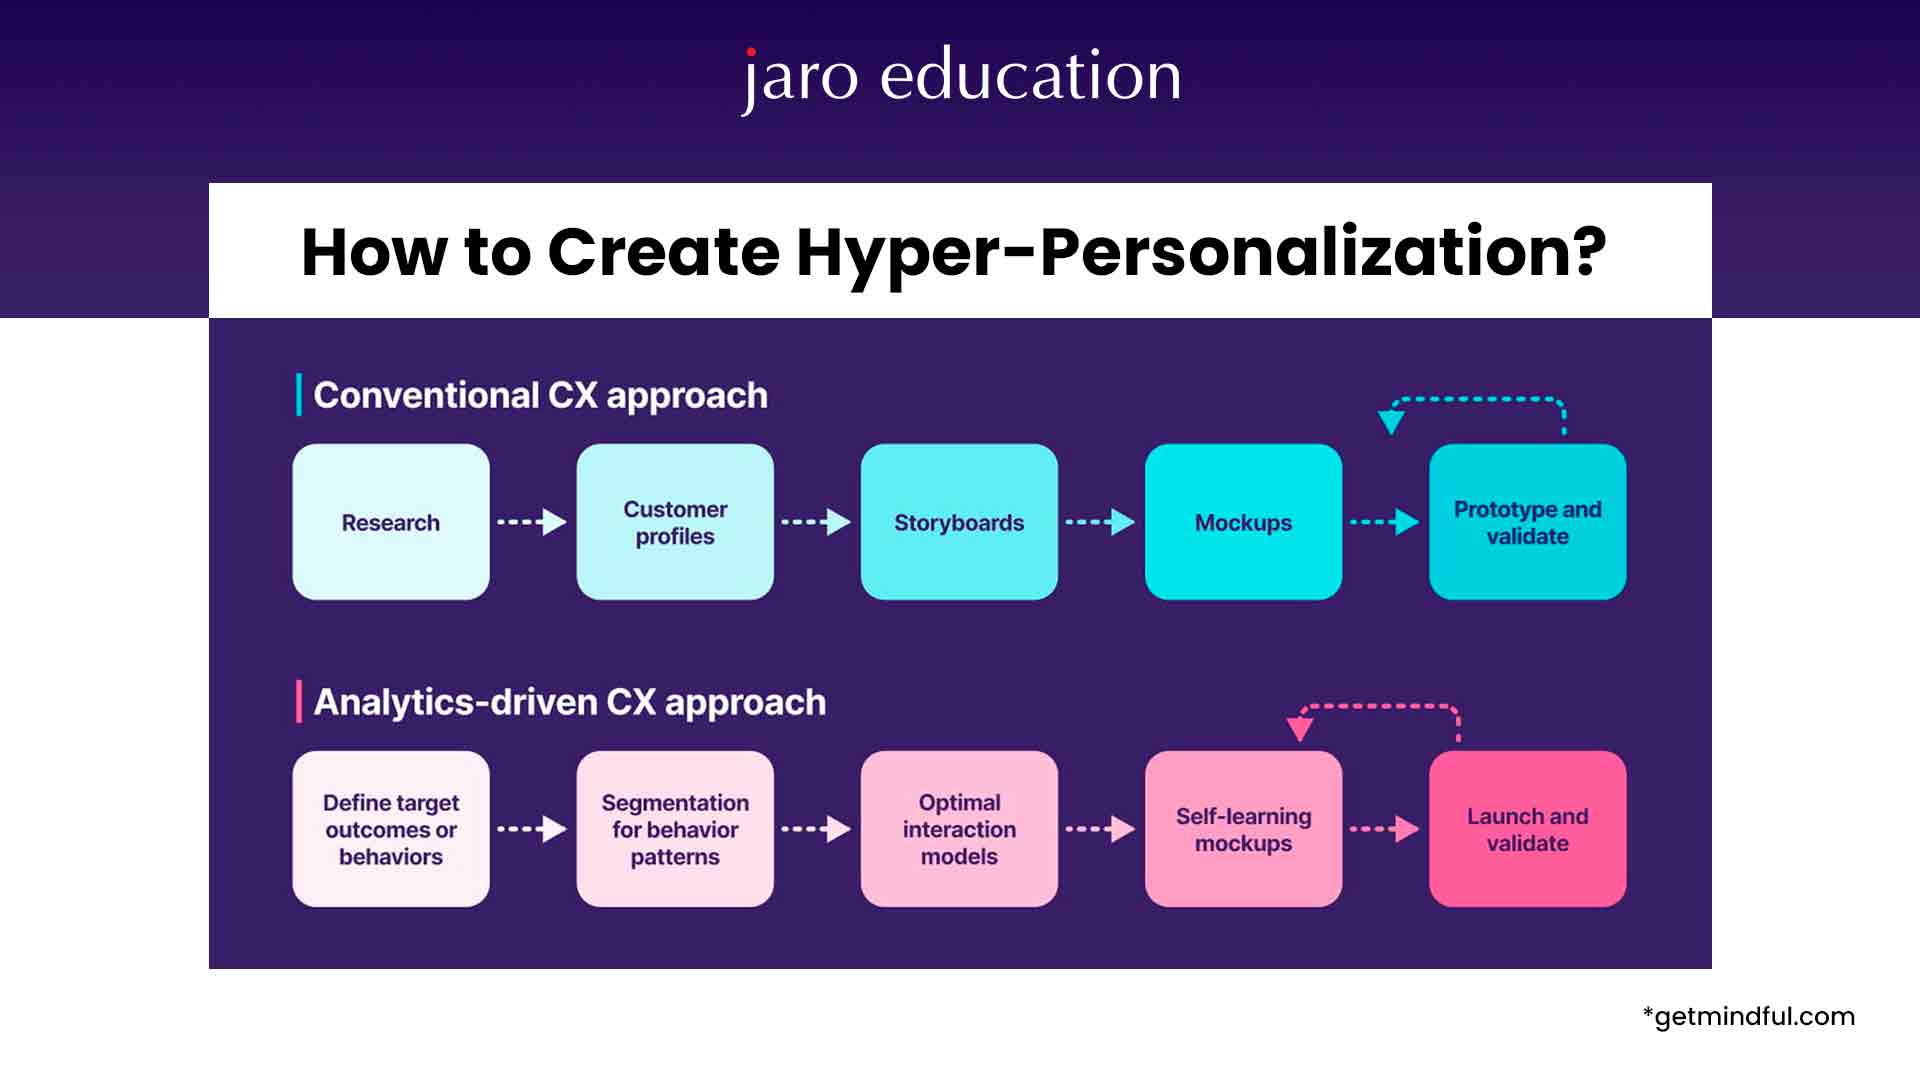 How to Create Hyper-Personalization?